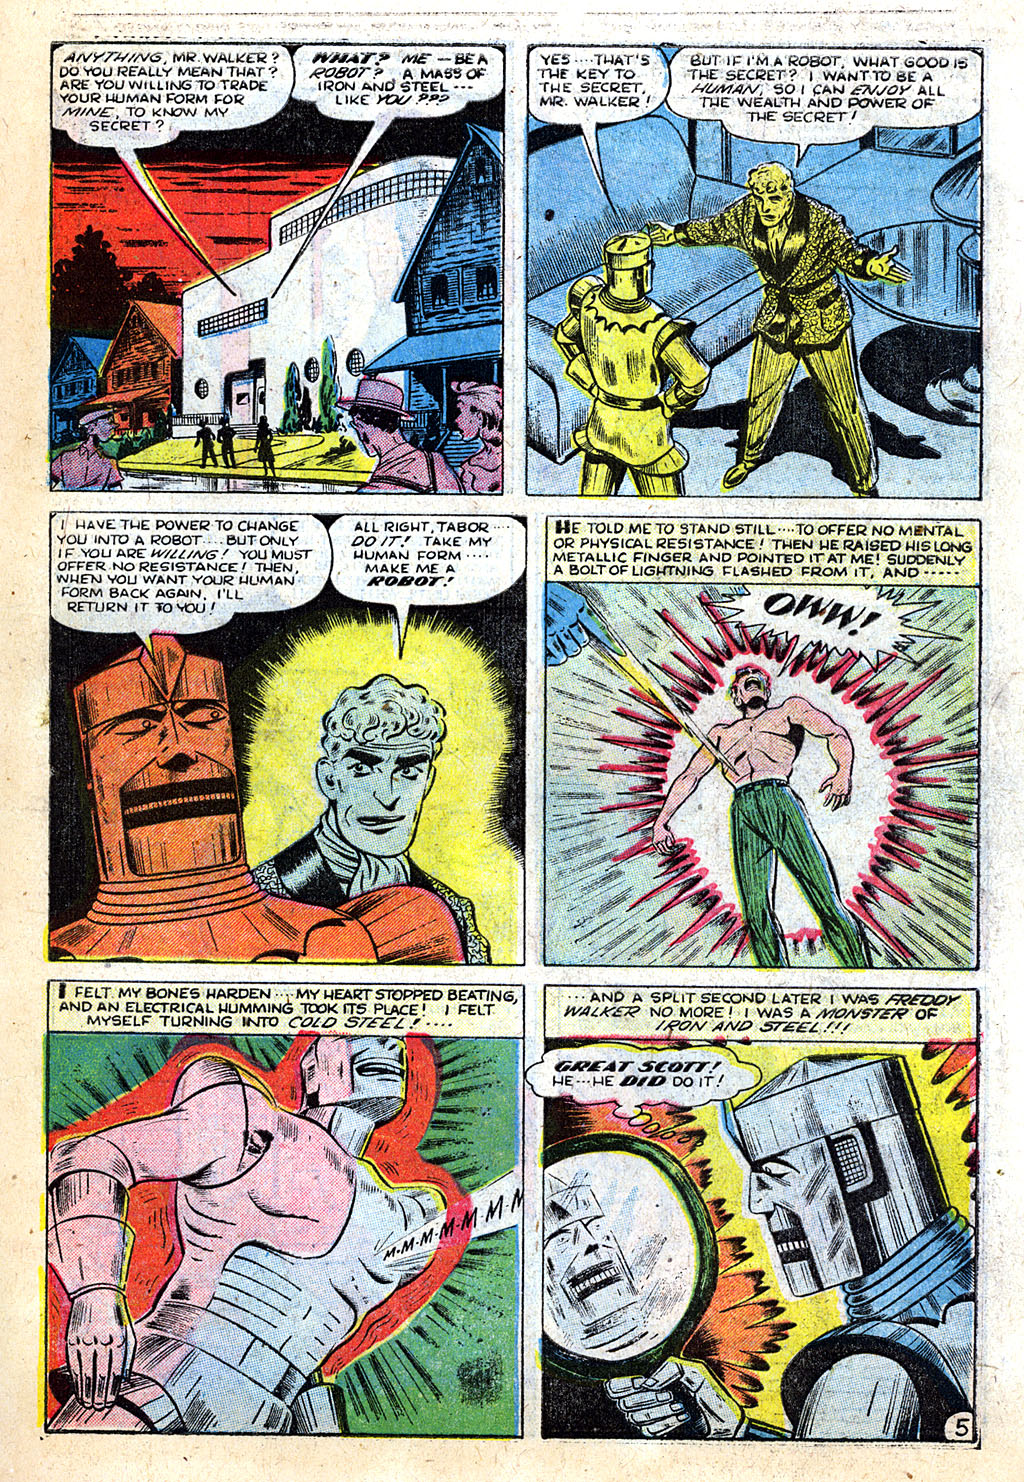 Marvel Tales (1949) 104 Page 6